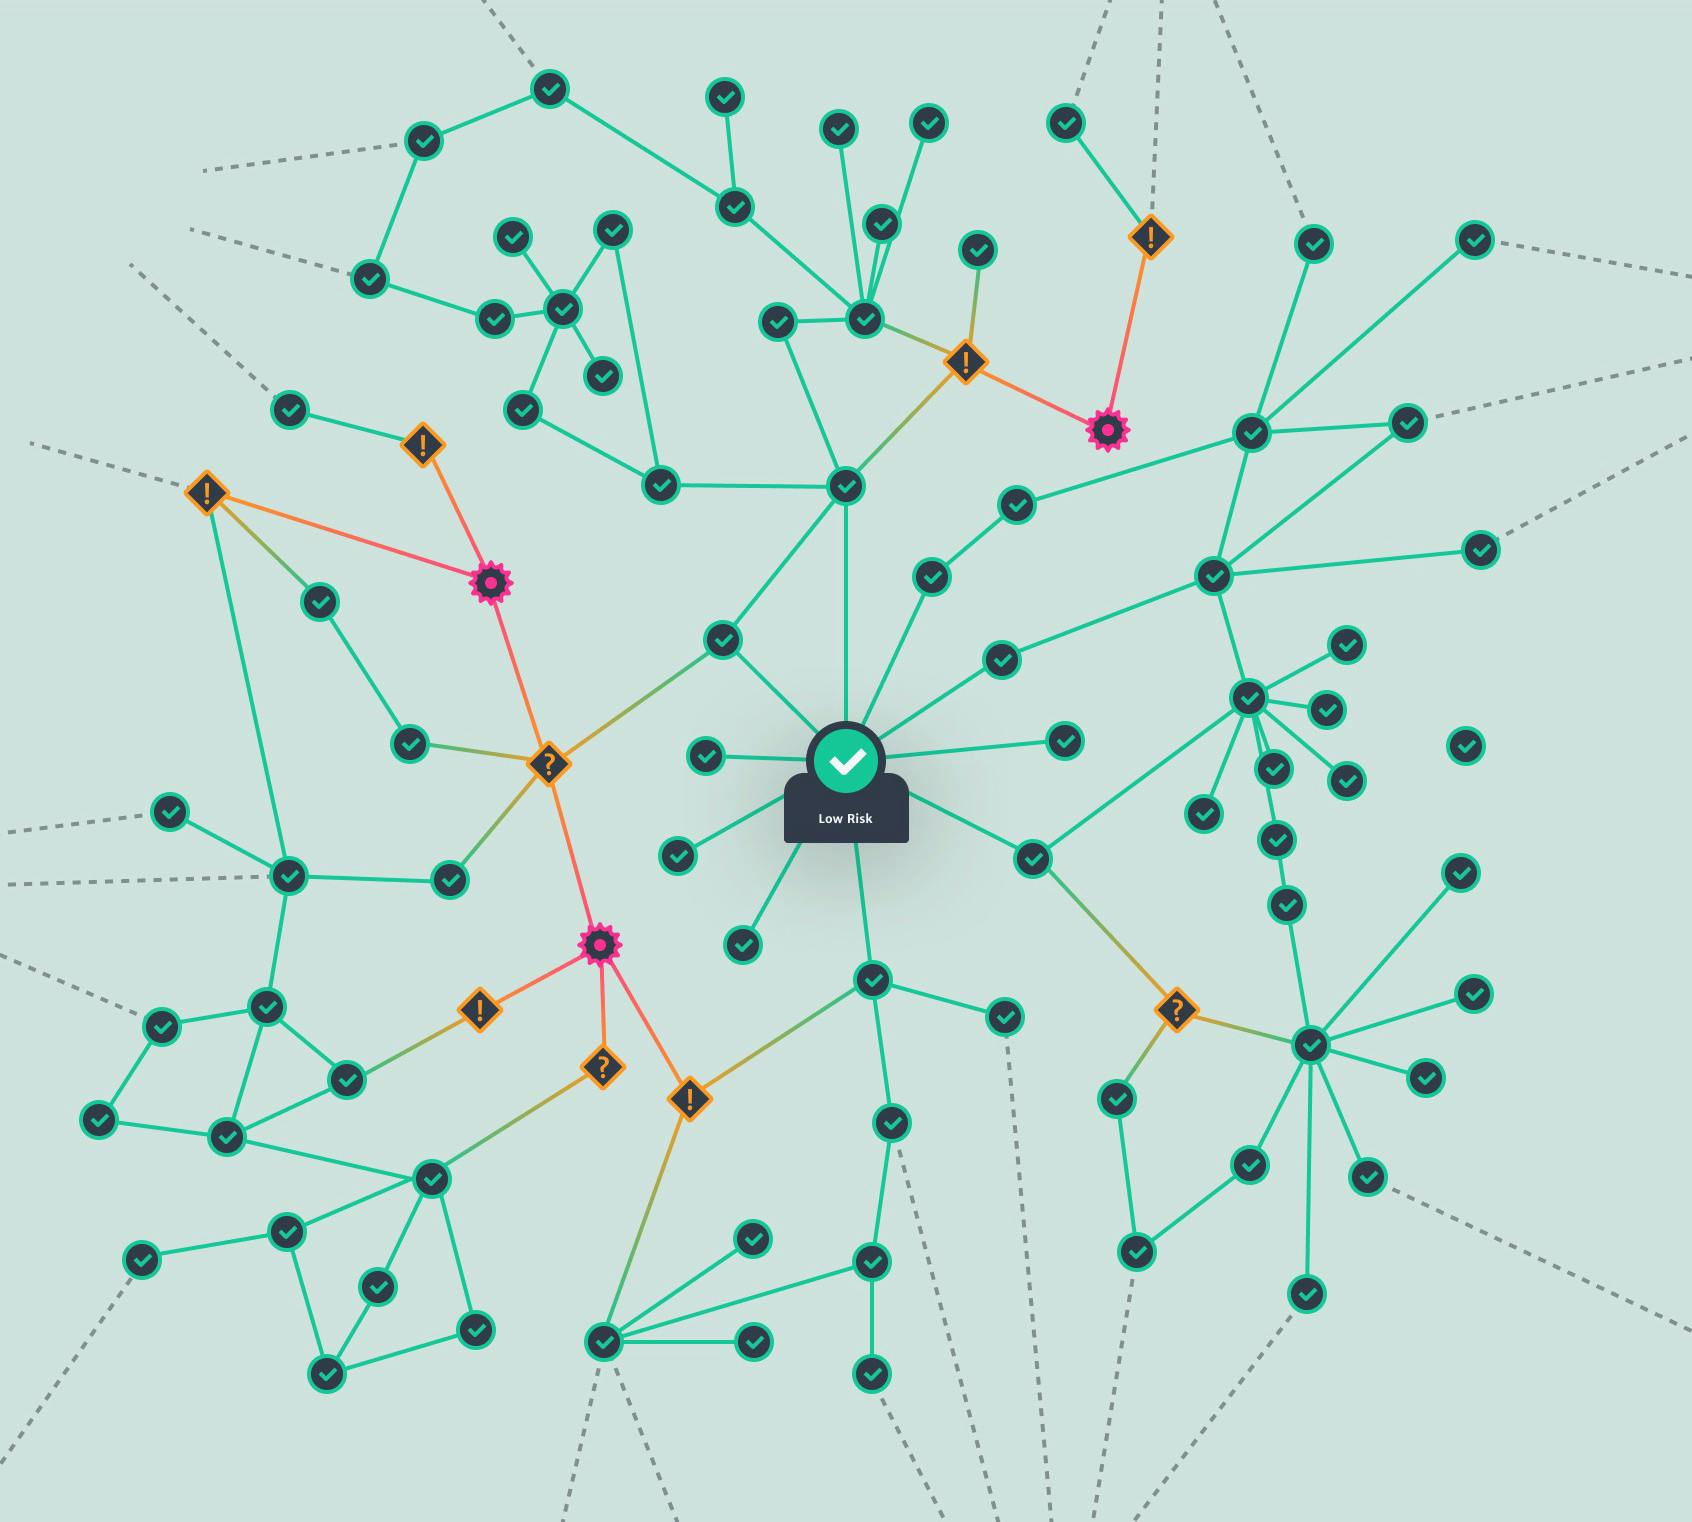 Low risk state of the force-directed graph data visual, showing a network of anonymous contact tracing with a green background.